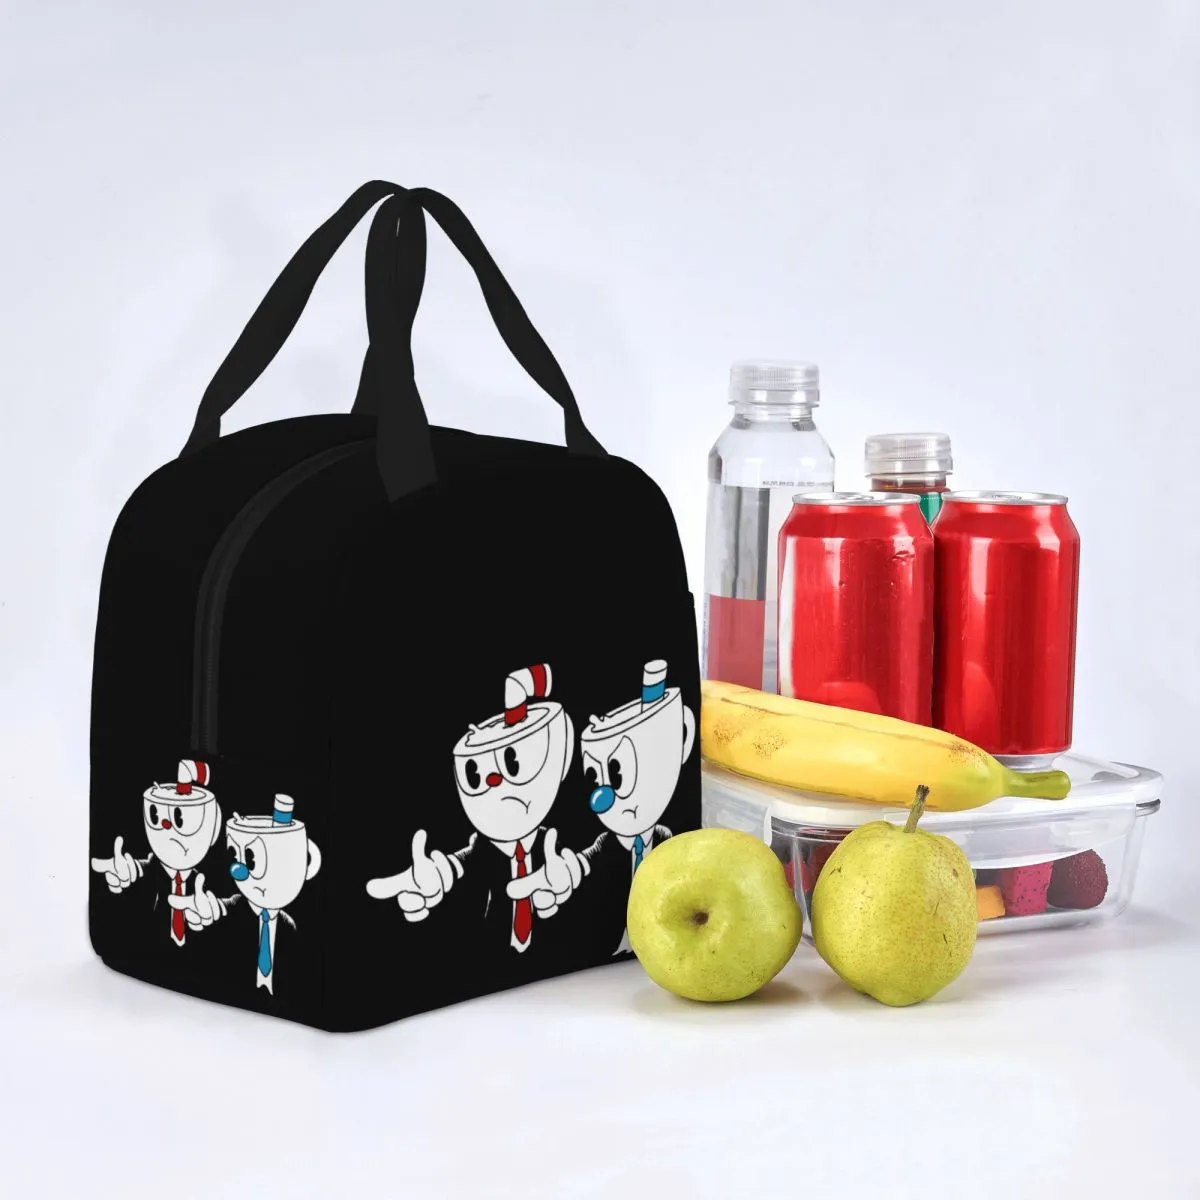 The Cuphead Cup Isolate Lunch Sac Coloner Sac réutilisable Anime grande boîte à lunch TOTER